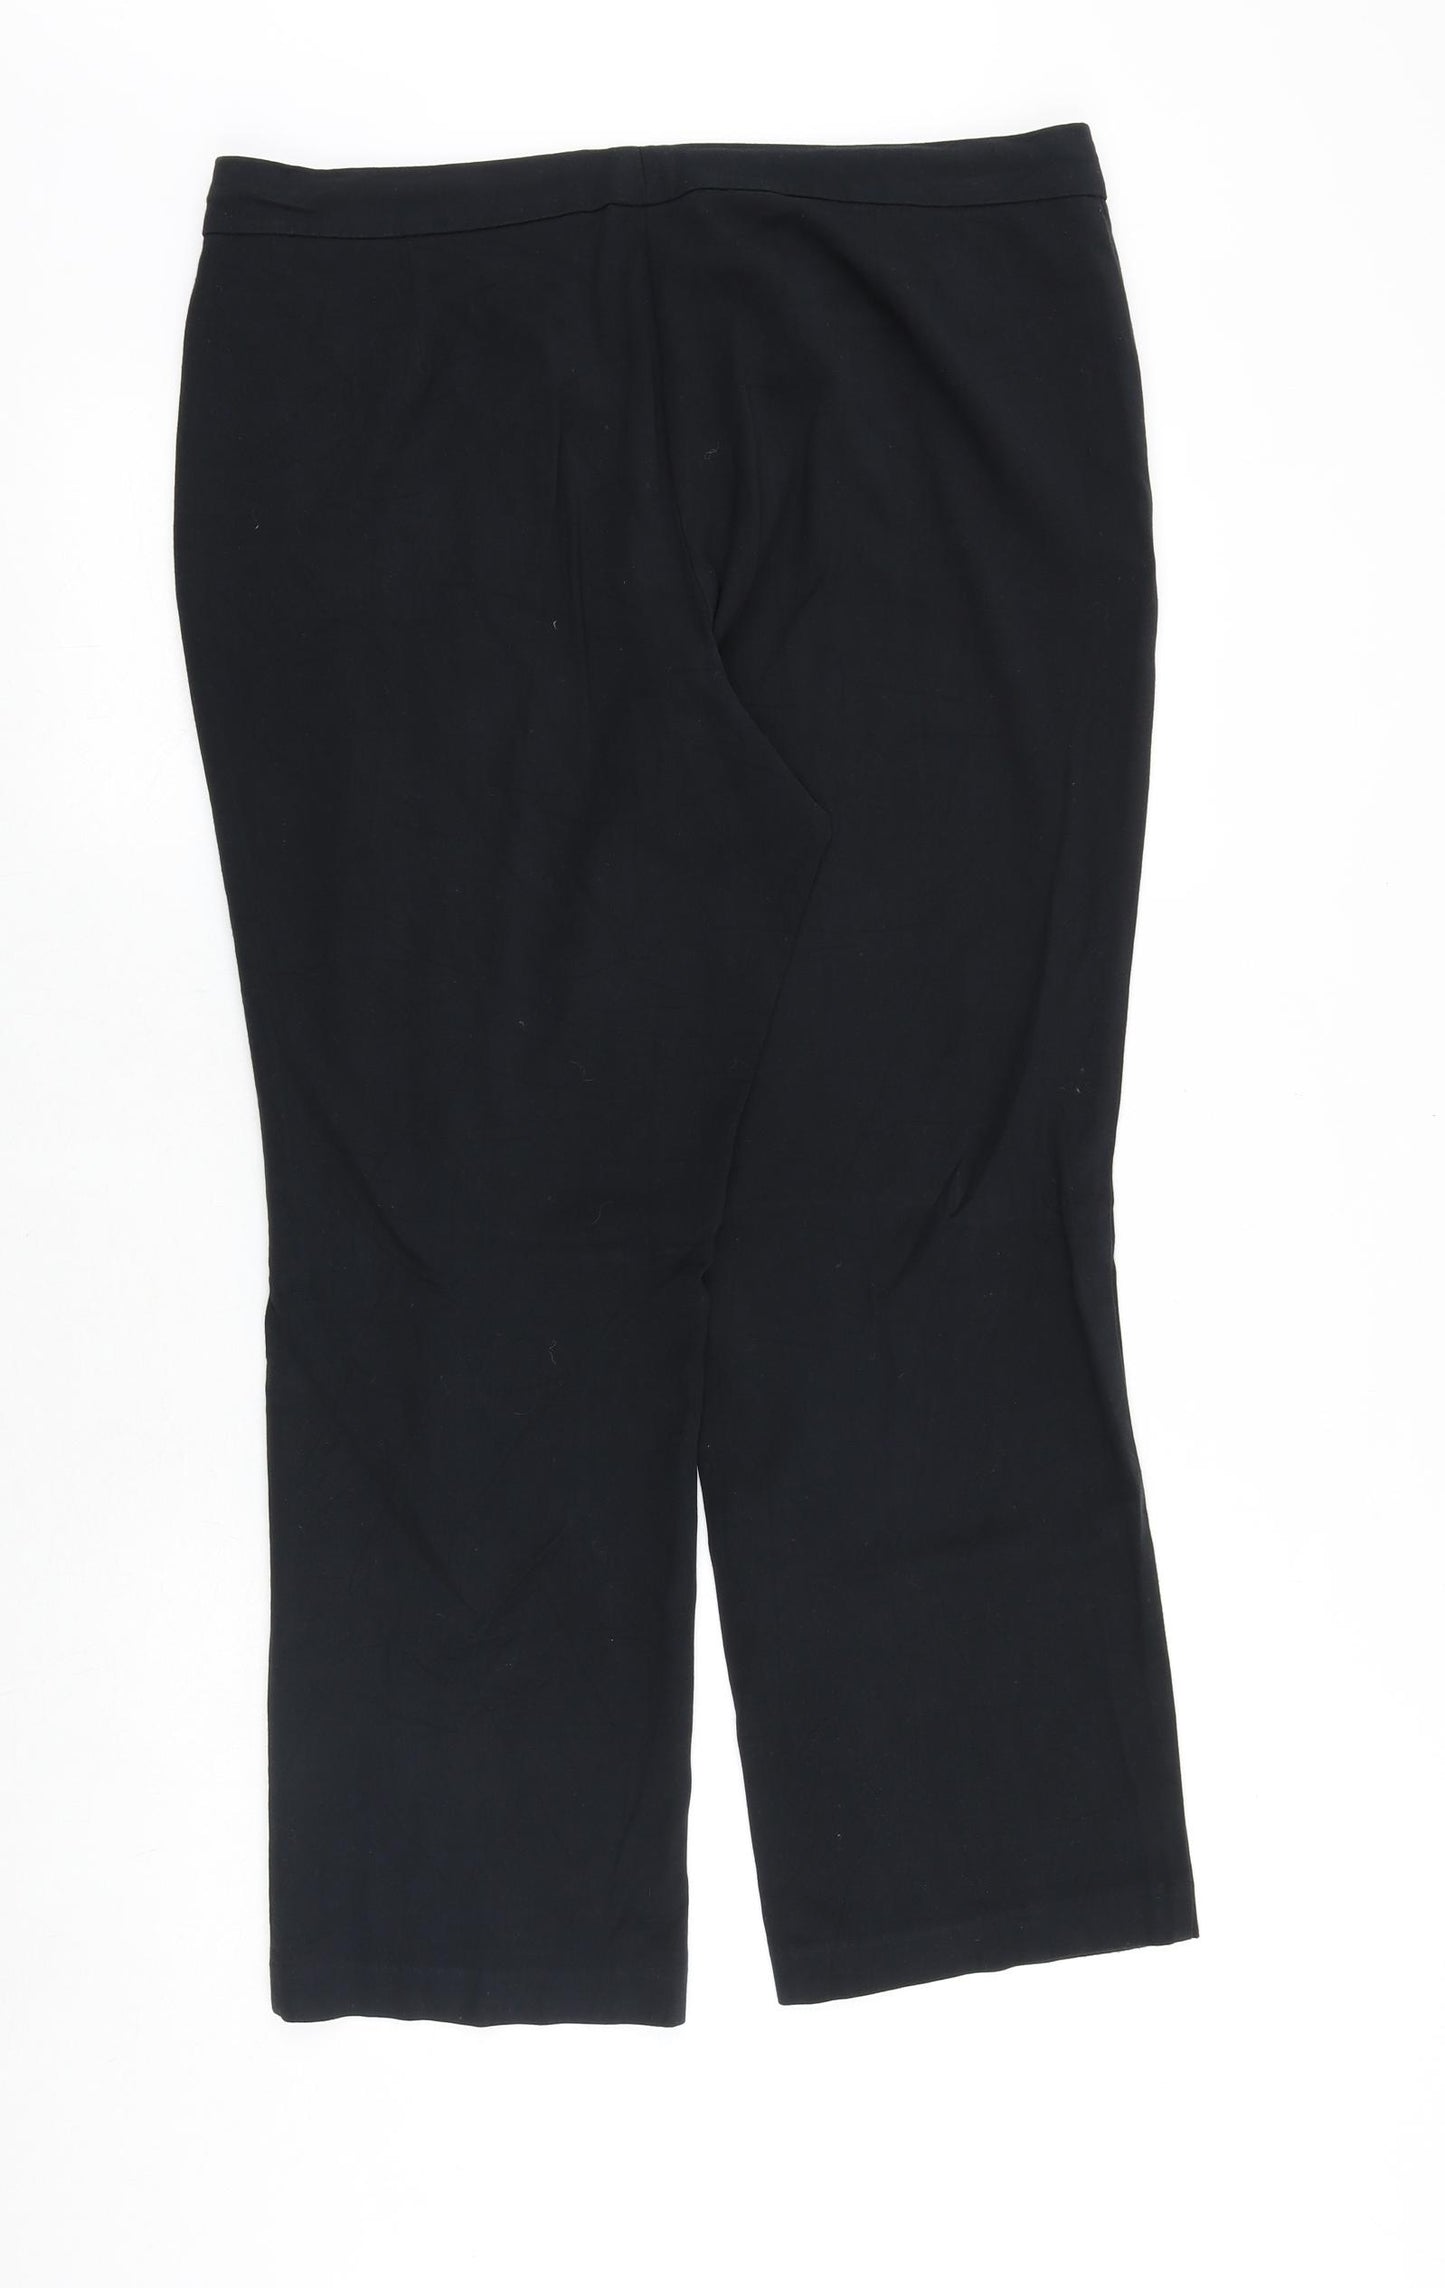 Marks and Spencer Womens Black Polyester Dress Pants Trousers Size 16 Regular Zip - Zipped Pockets